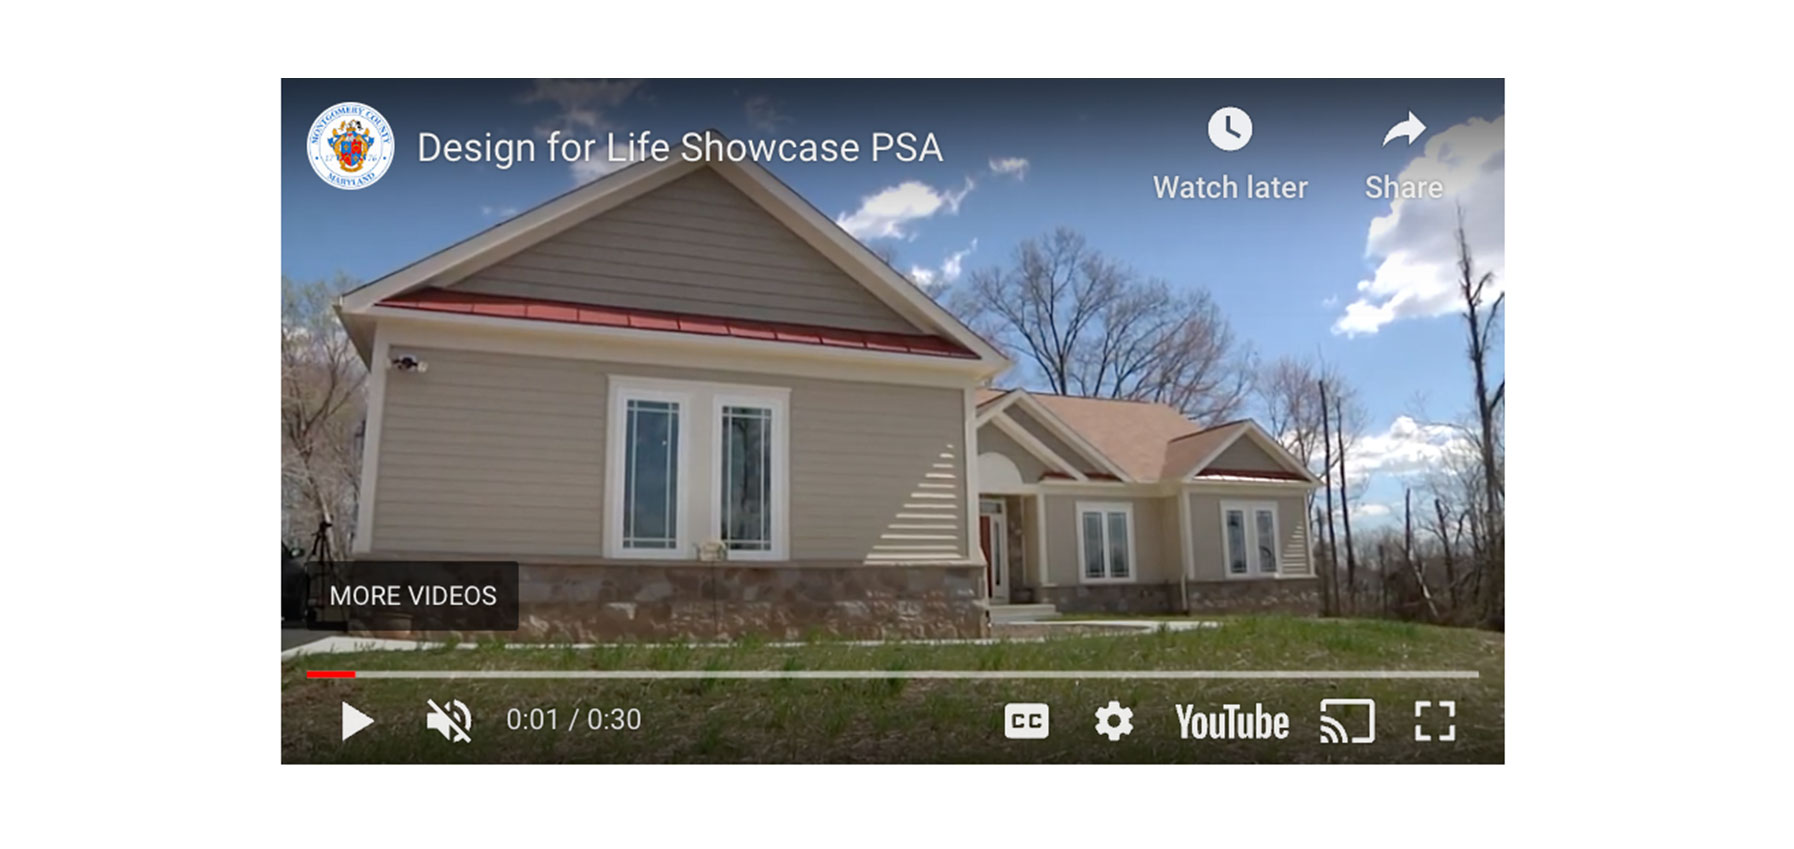 A screenshot of a YouTube video title Design for Life Showcase PSA